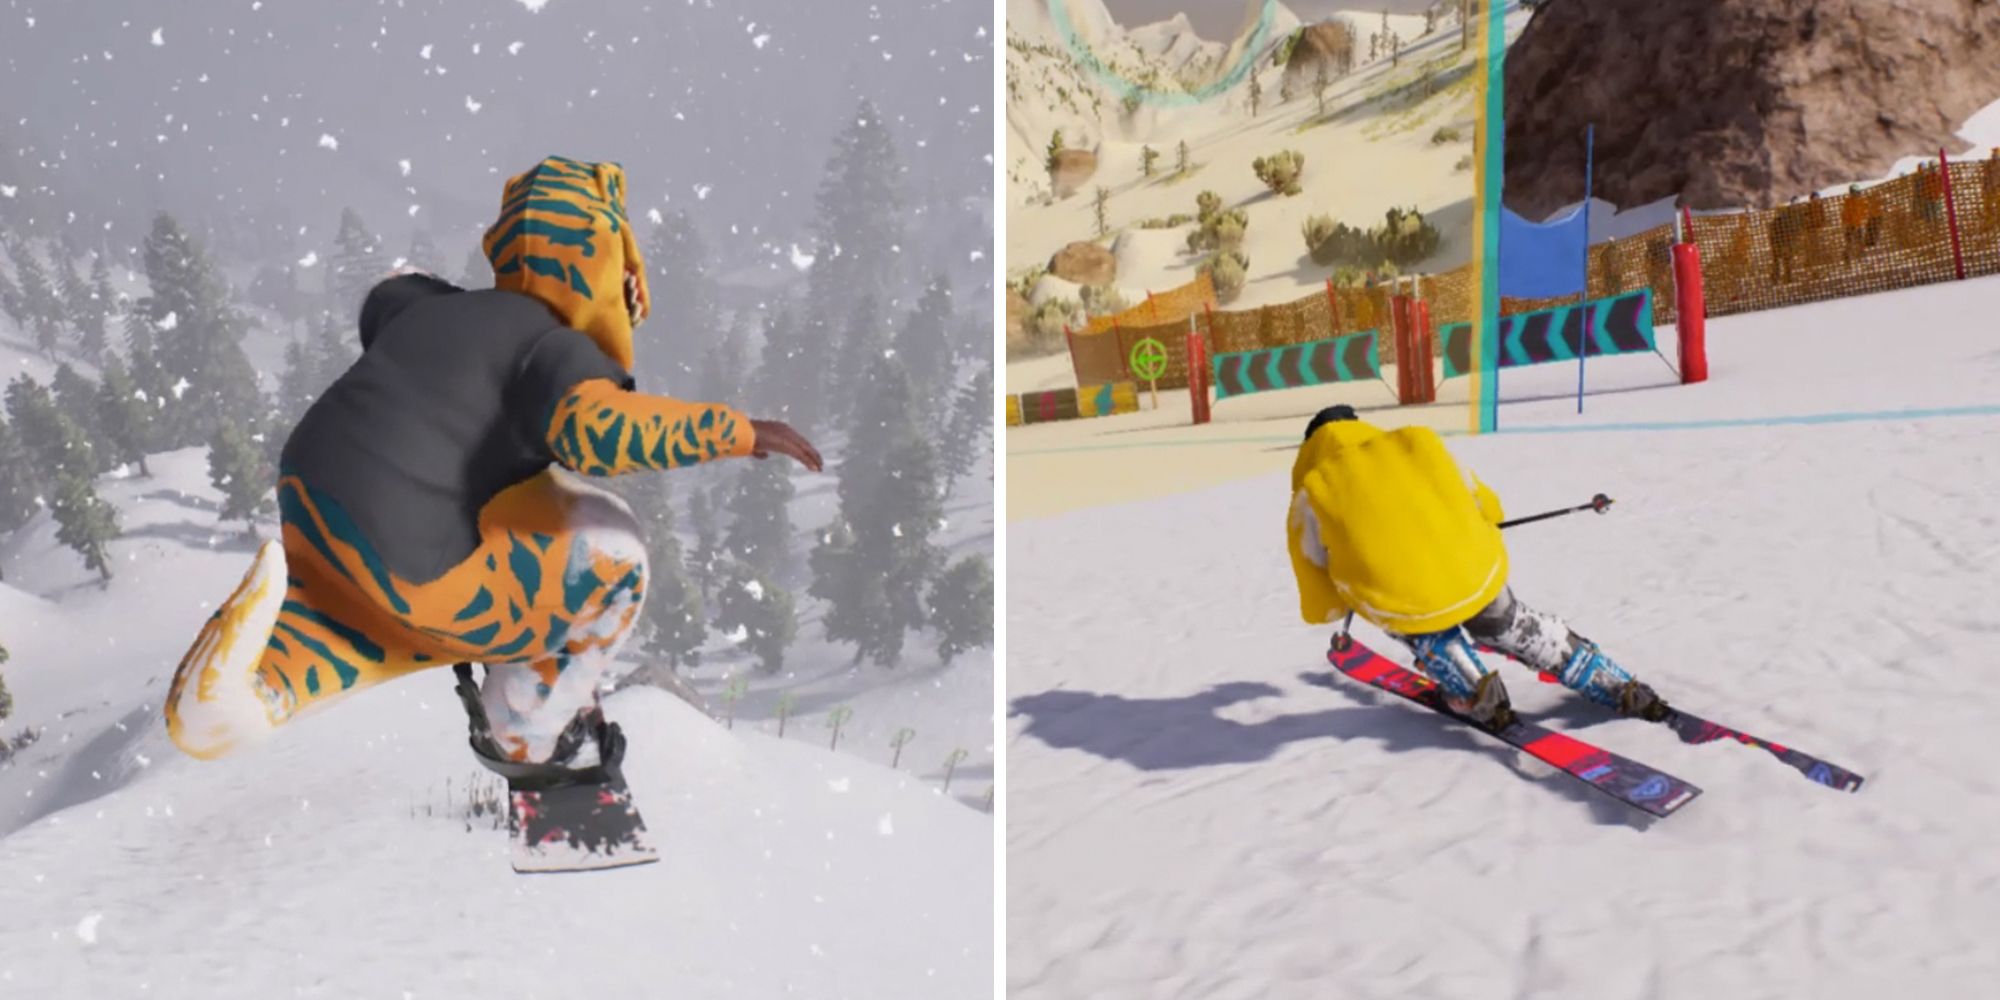 Riders Republic. Split image. Dinosaur outfit riding snowboard on left. Skis on the right.